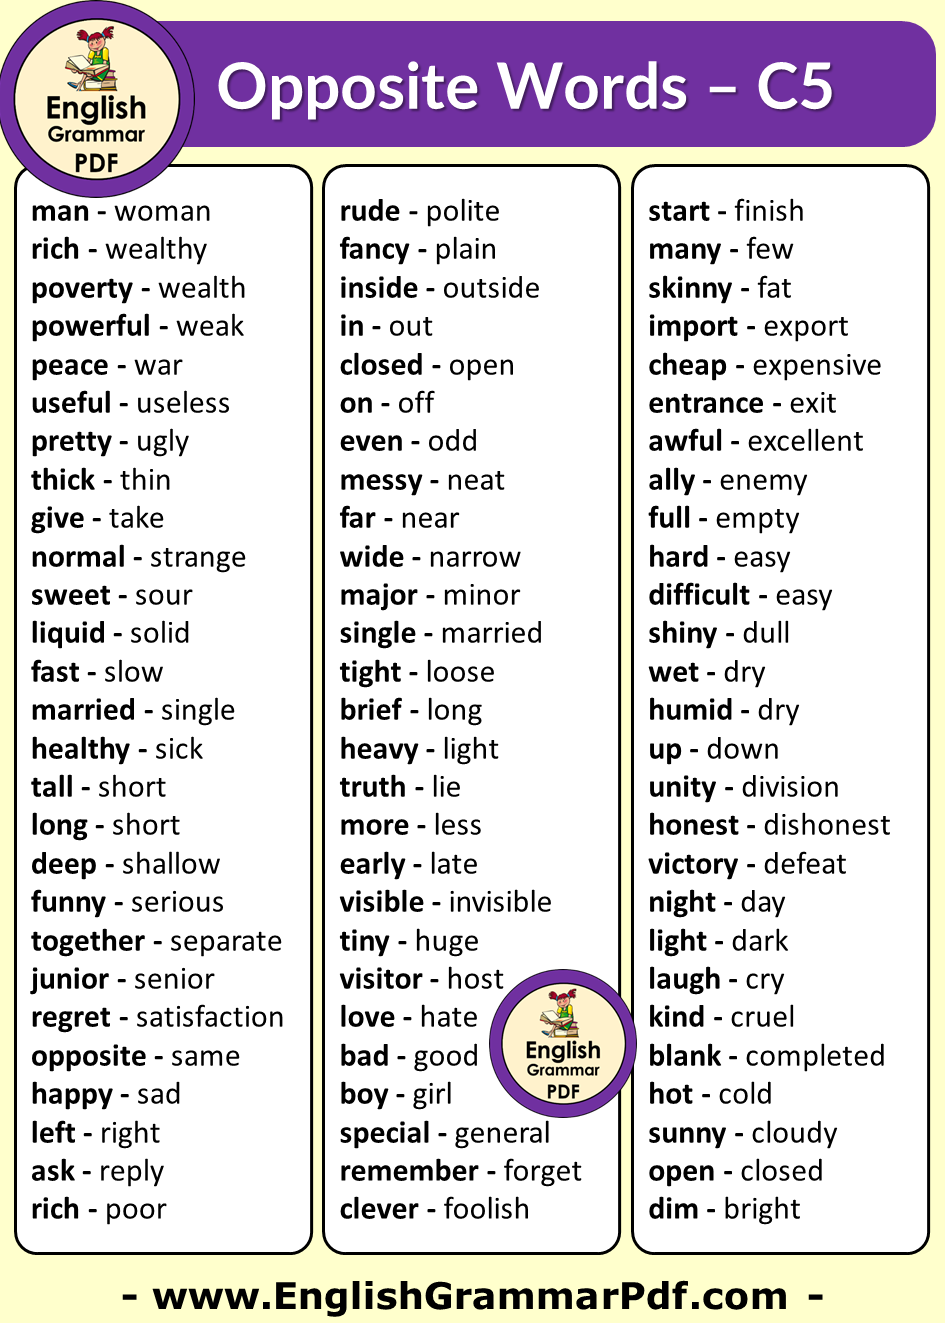 20 Opposite Words In English For Class 5 English Grammar Pdf